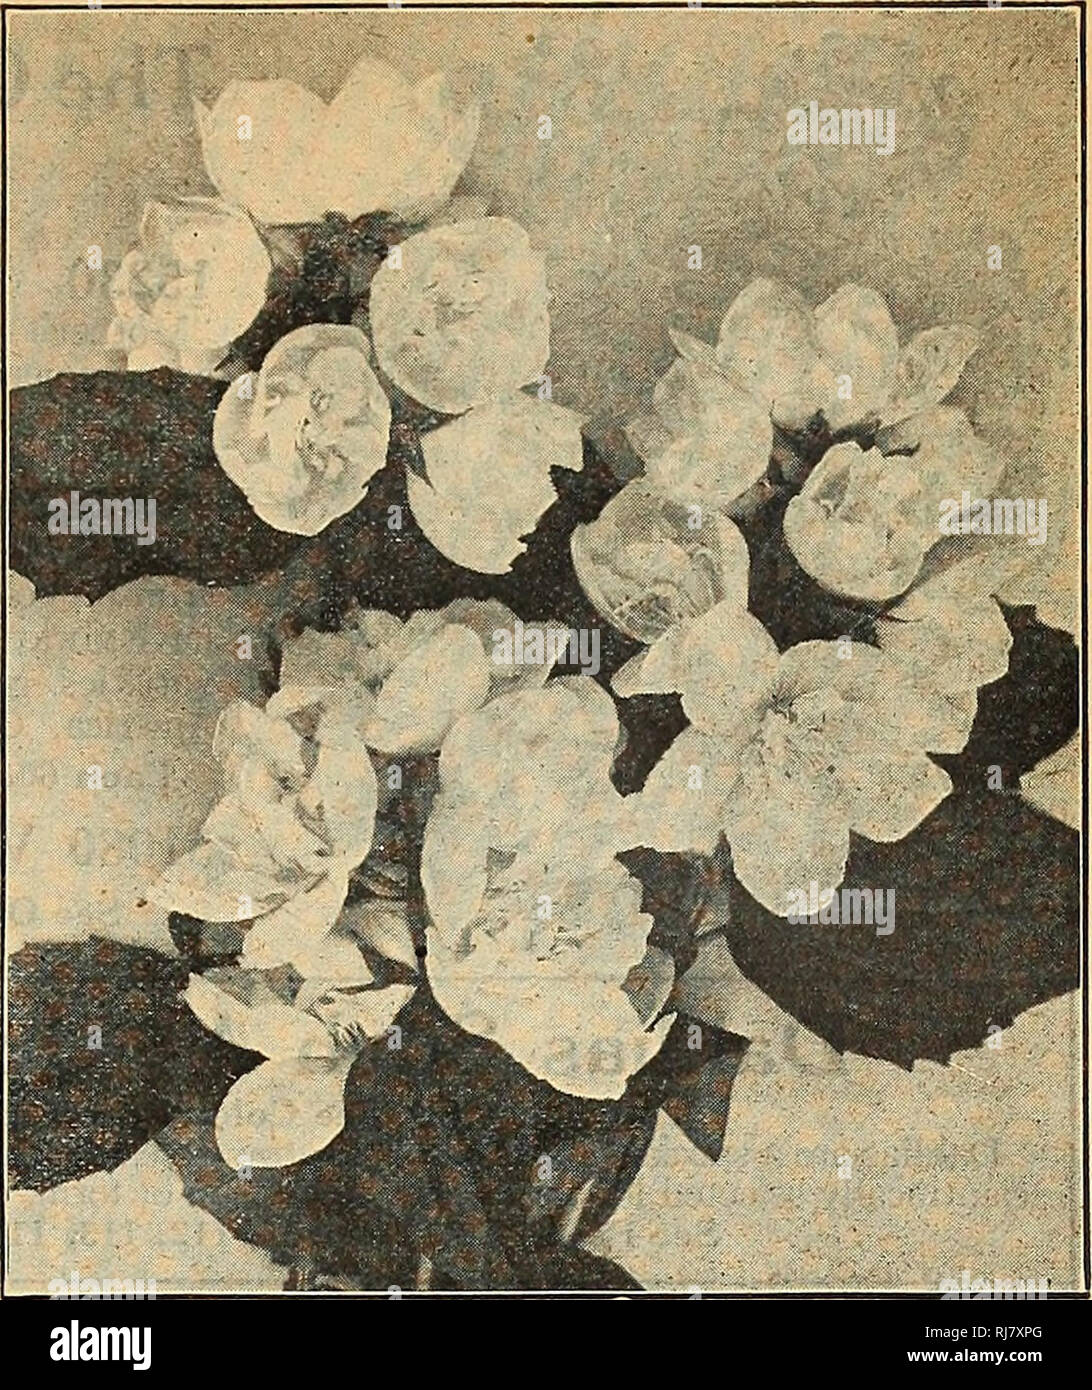 . Childs' 1925 : 50th anniversary. Commercial catalogs Seeds; Nurseries (Horticulture) Catalogs; Seeds Catalogs; Flowers Catalogs; Vegetables Catalogs; Fruit Catalogs; John Lewis Childs (Firm); Commercial catalogs; Nurseries (Horticulture); Seeds; Flowers; Vegetables; Fruit. The sweet scented Syringa Virginale Azalia—The Most Beau- tiful Hardy Shrub In the 17rfc„l J Bushes become literally covered with VV UilU rose shaped flowers, so thick in fact you can hardly see the leaves on the bushes. It is a wonderfully prolific shrub. They start to bloom their heads off the first year and each year a Stock Photo